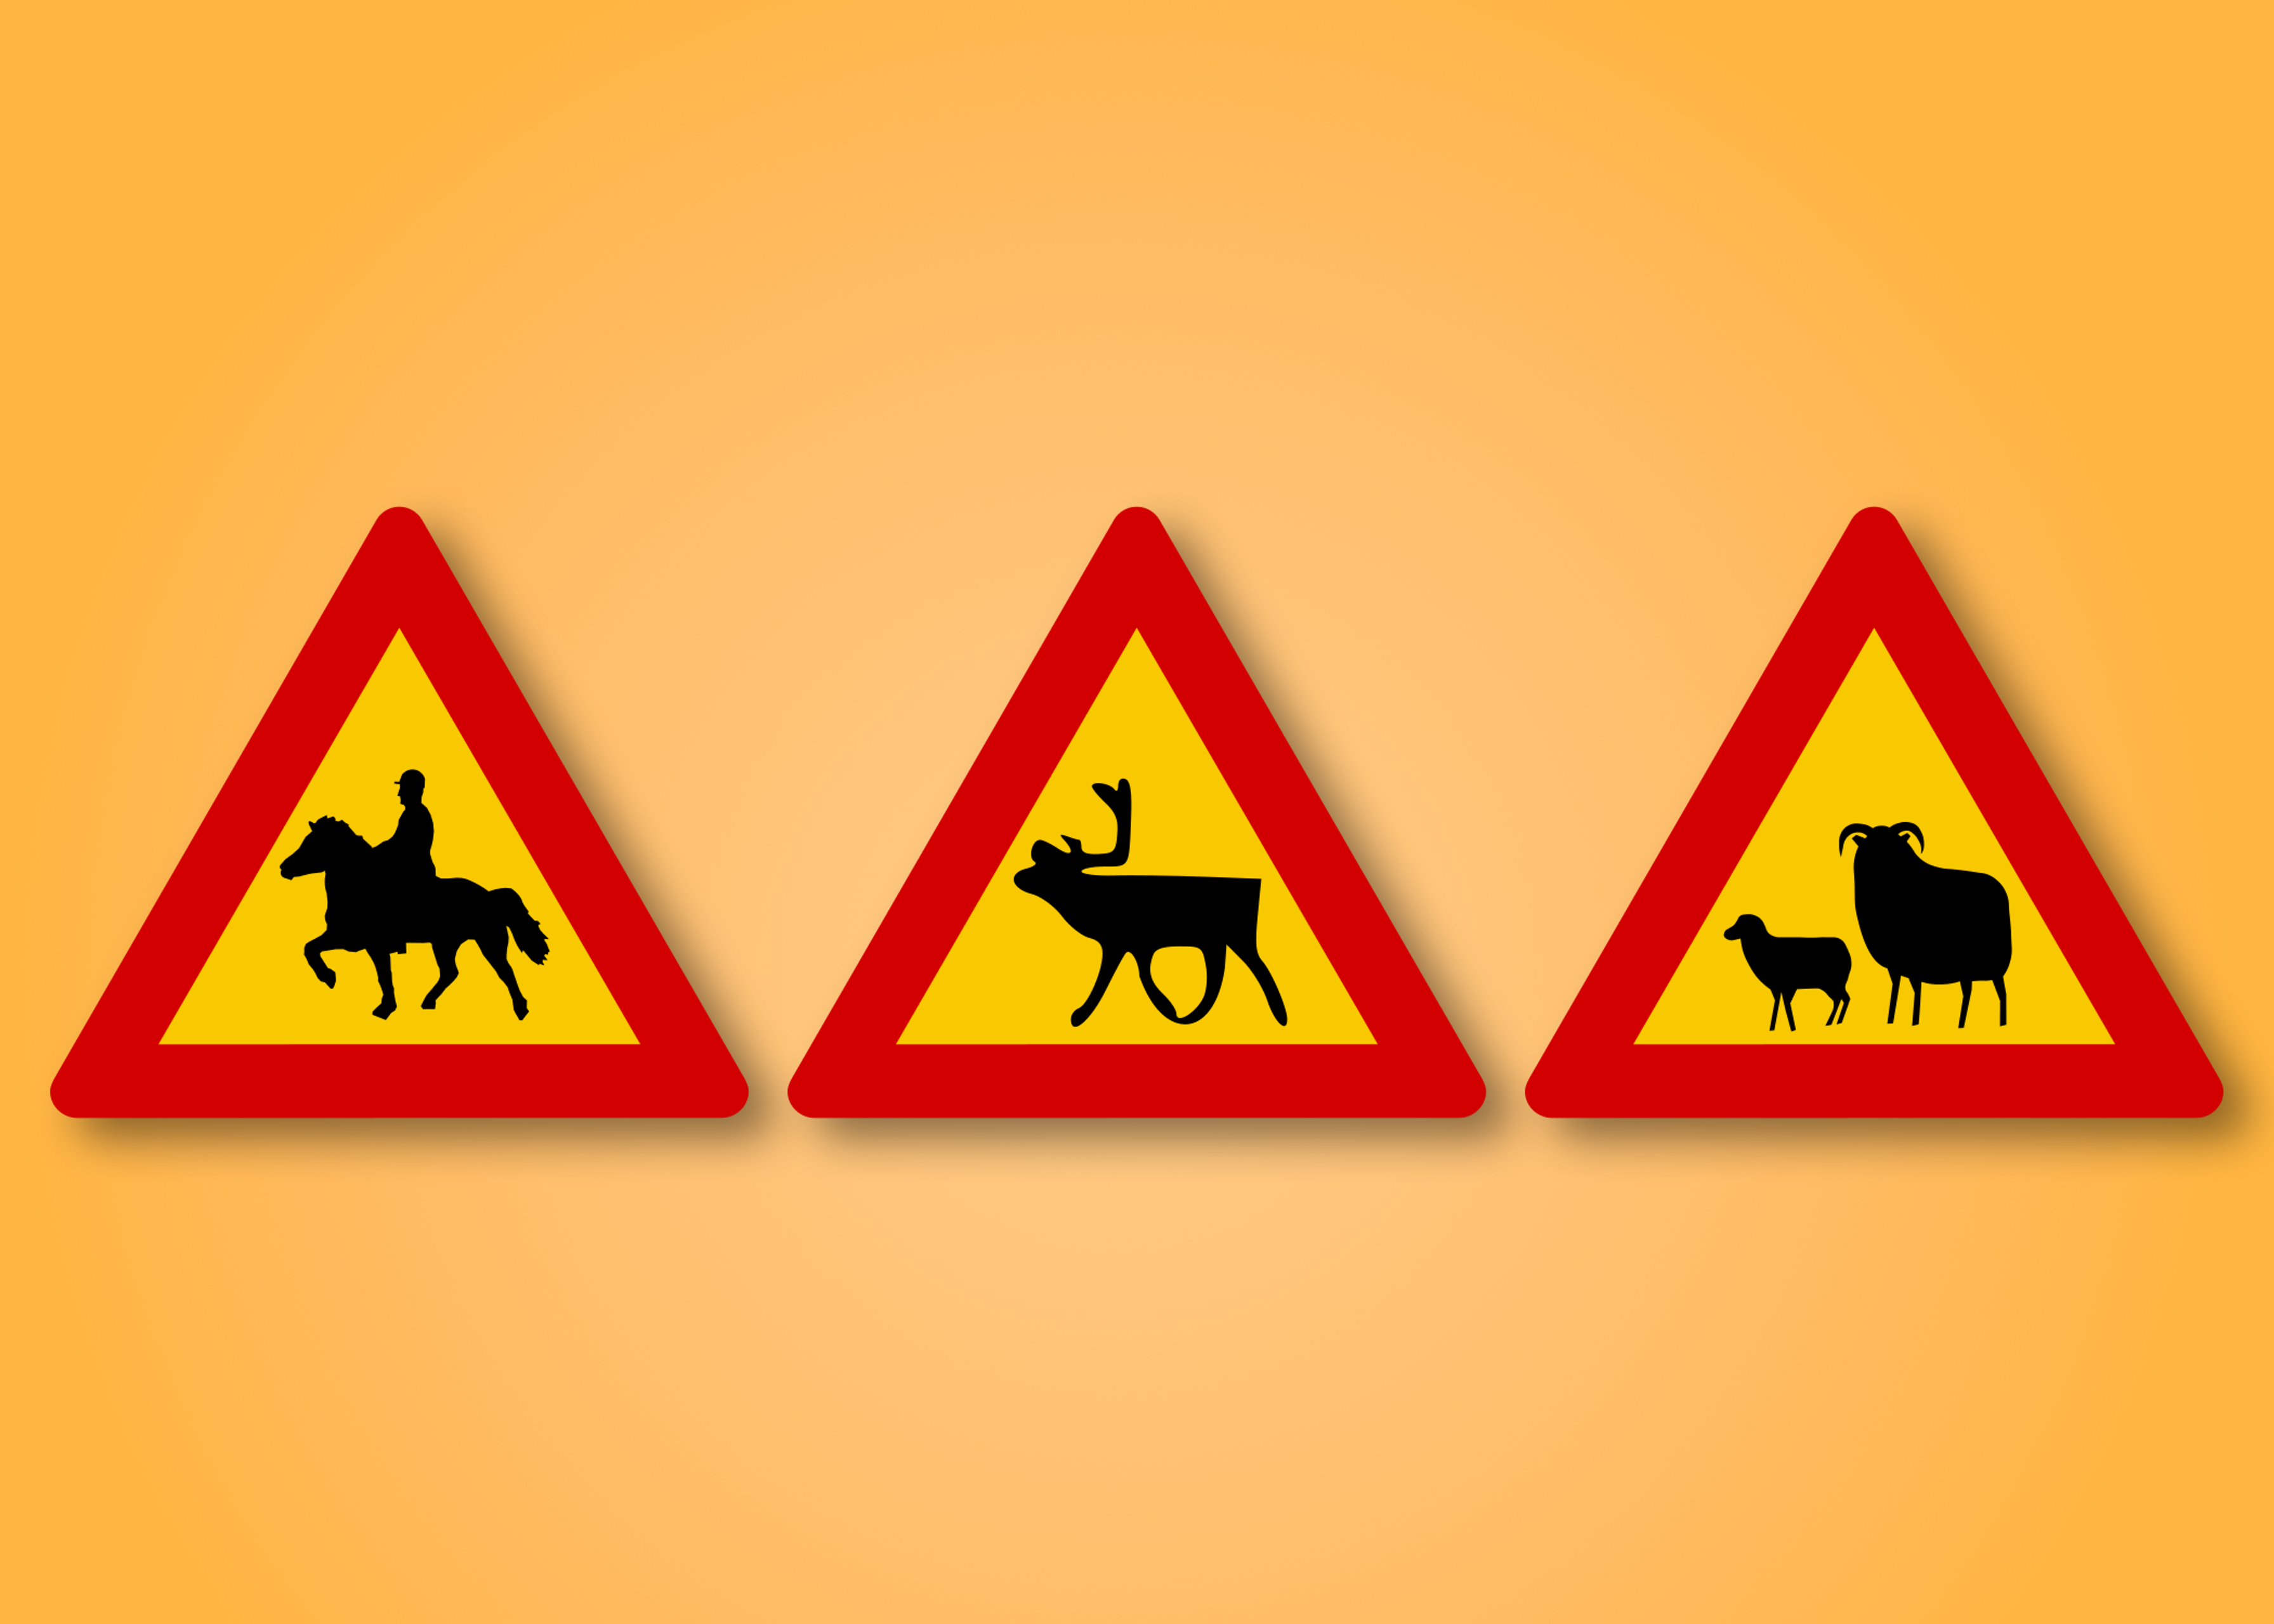 Red and yellow triangle road sign with Animals in the middle. This road sign means Animals on the road ahead